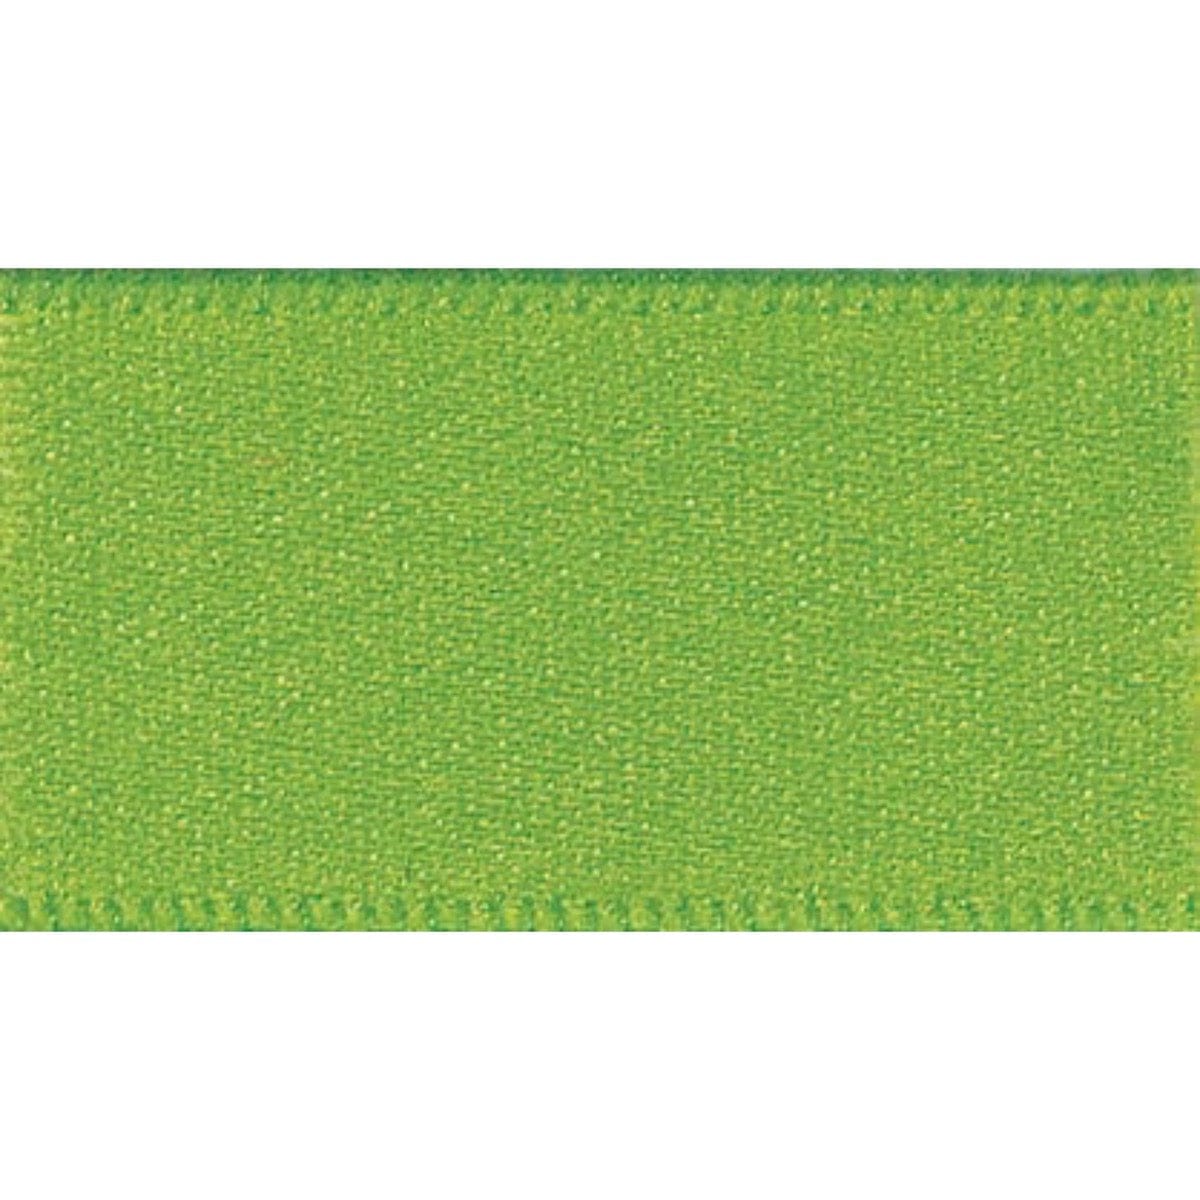 Double Faced Satin Ribbon: Meadow Green: 35mm wide. Price per metre.